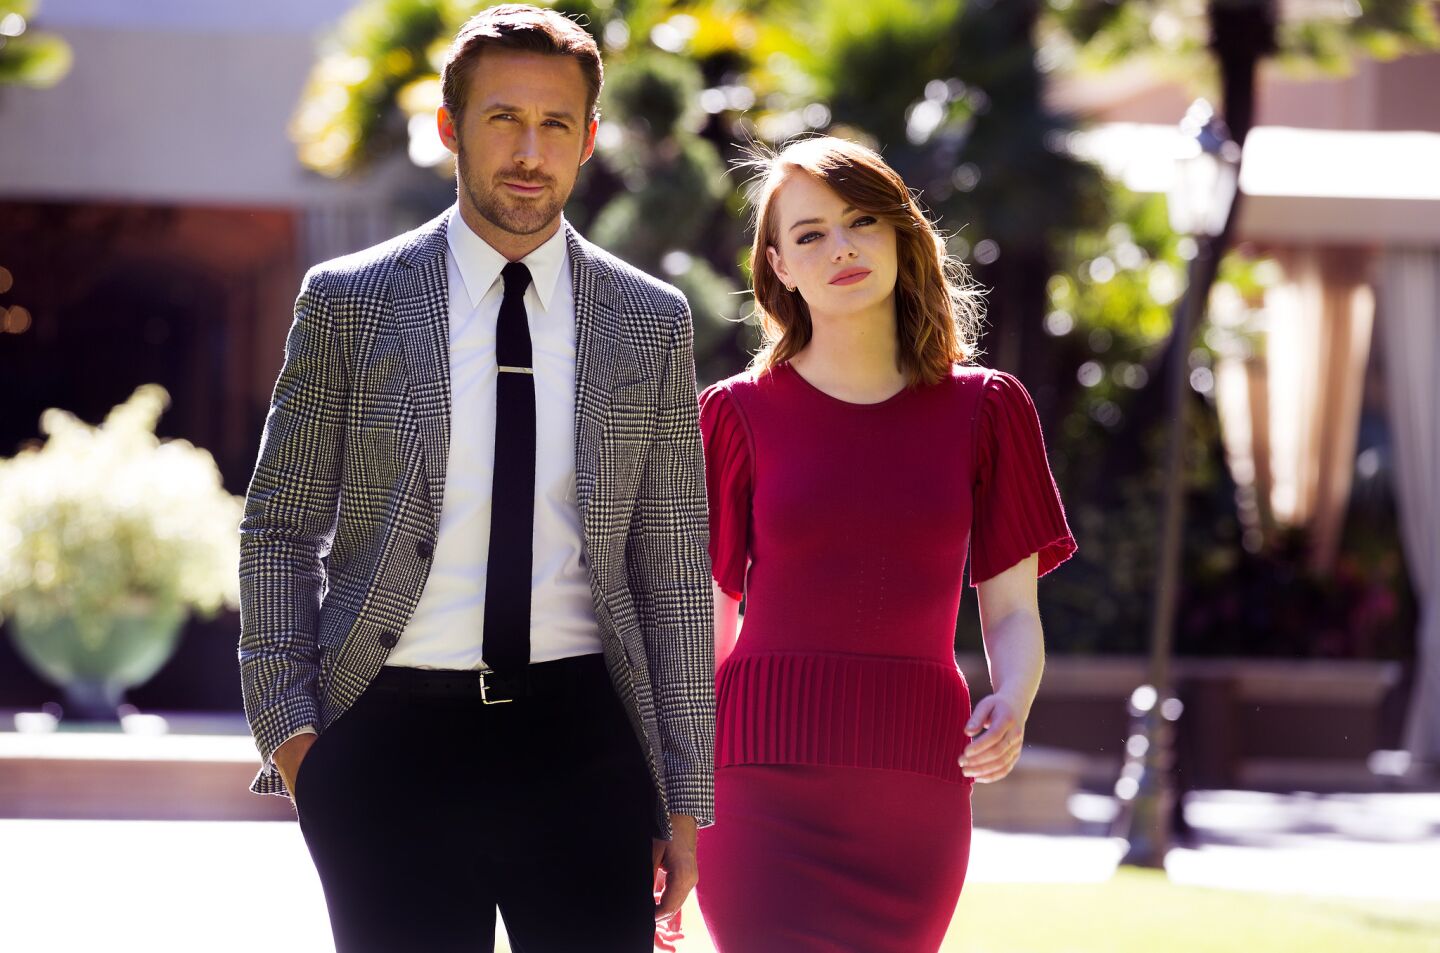 Celebrity portraits by The Times | Ryan Gosling and Emma Stone